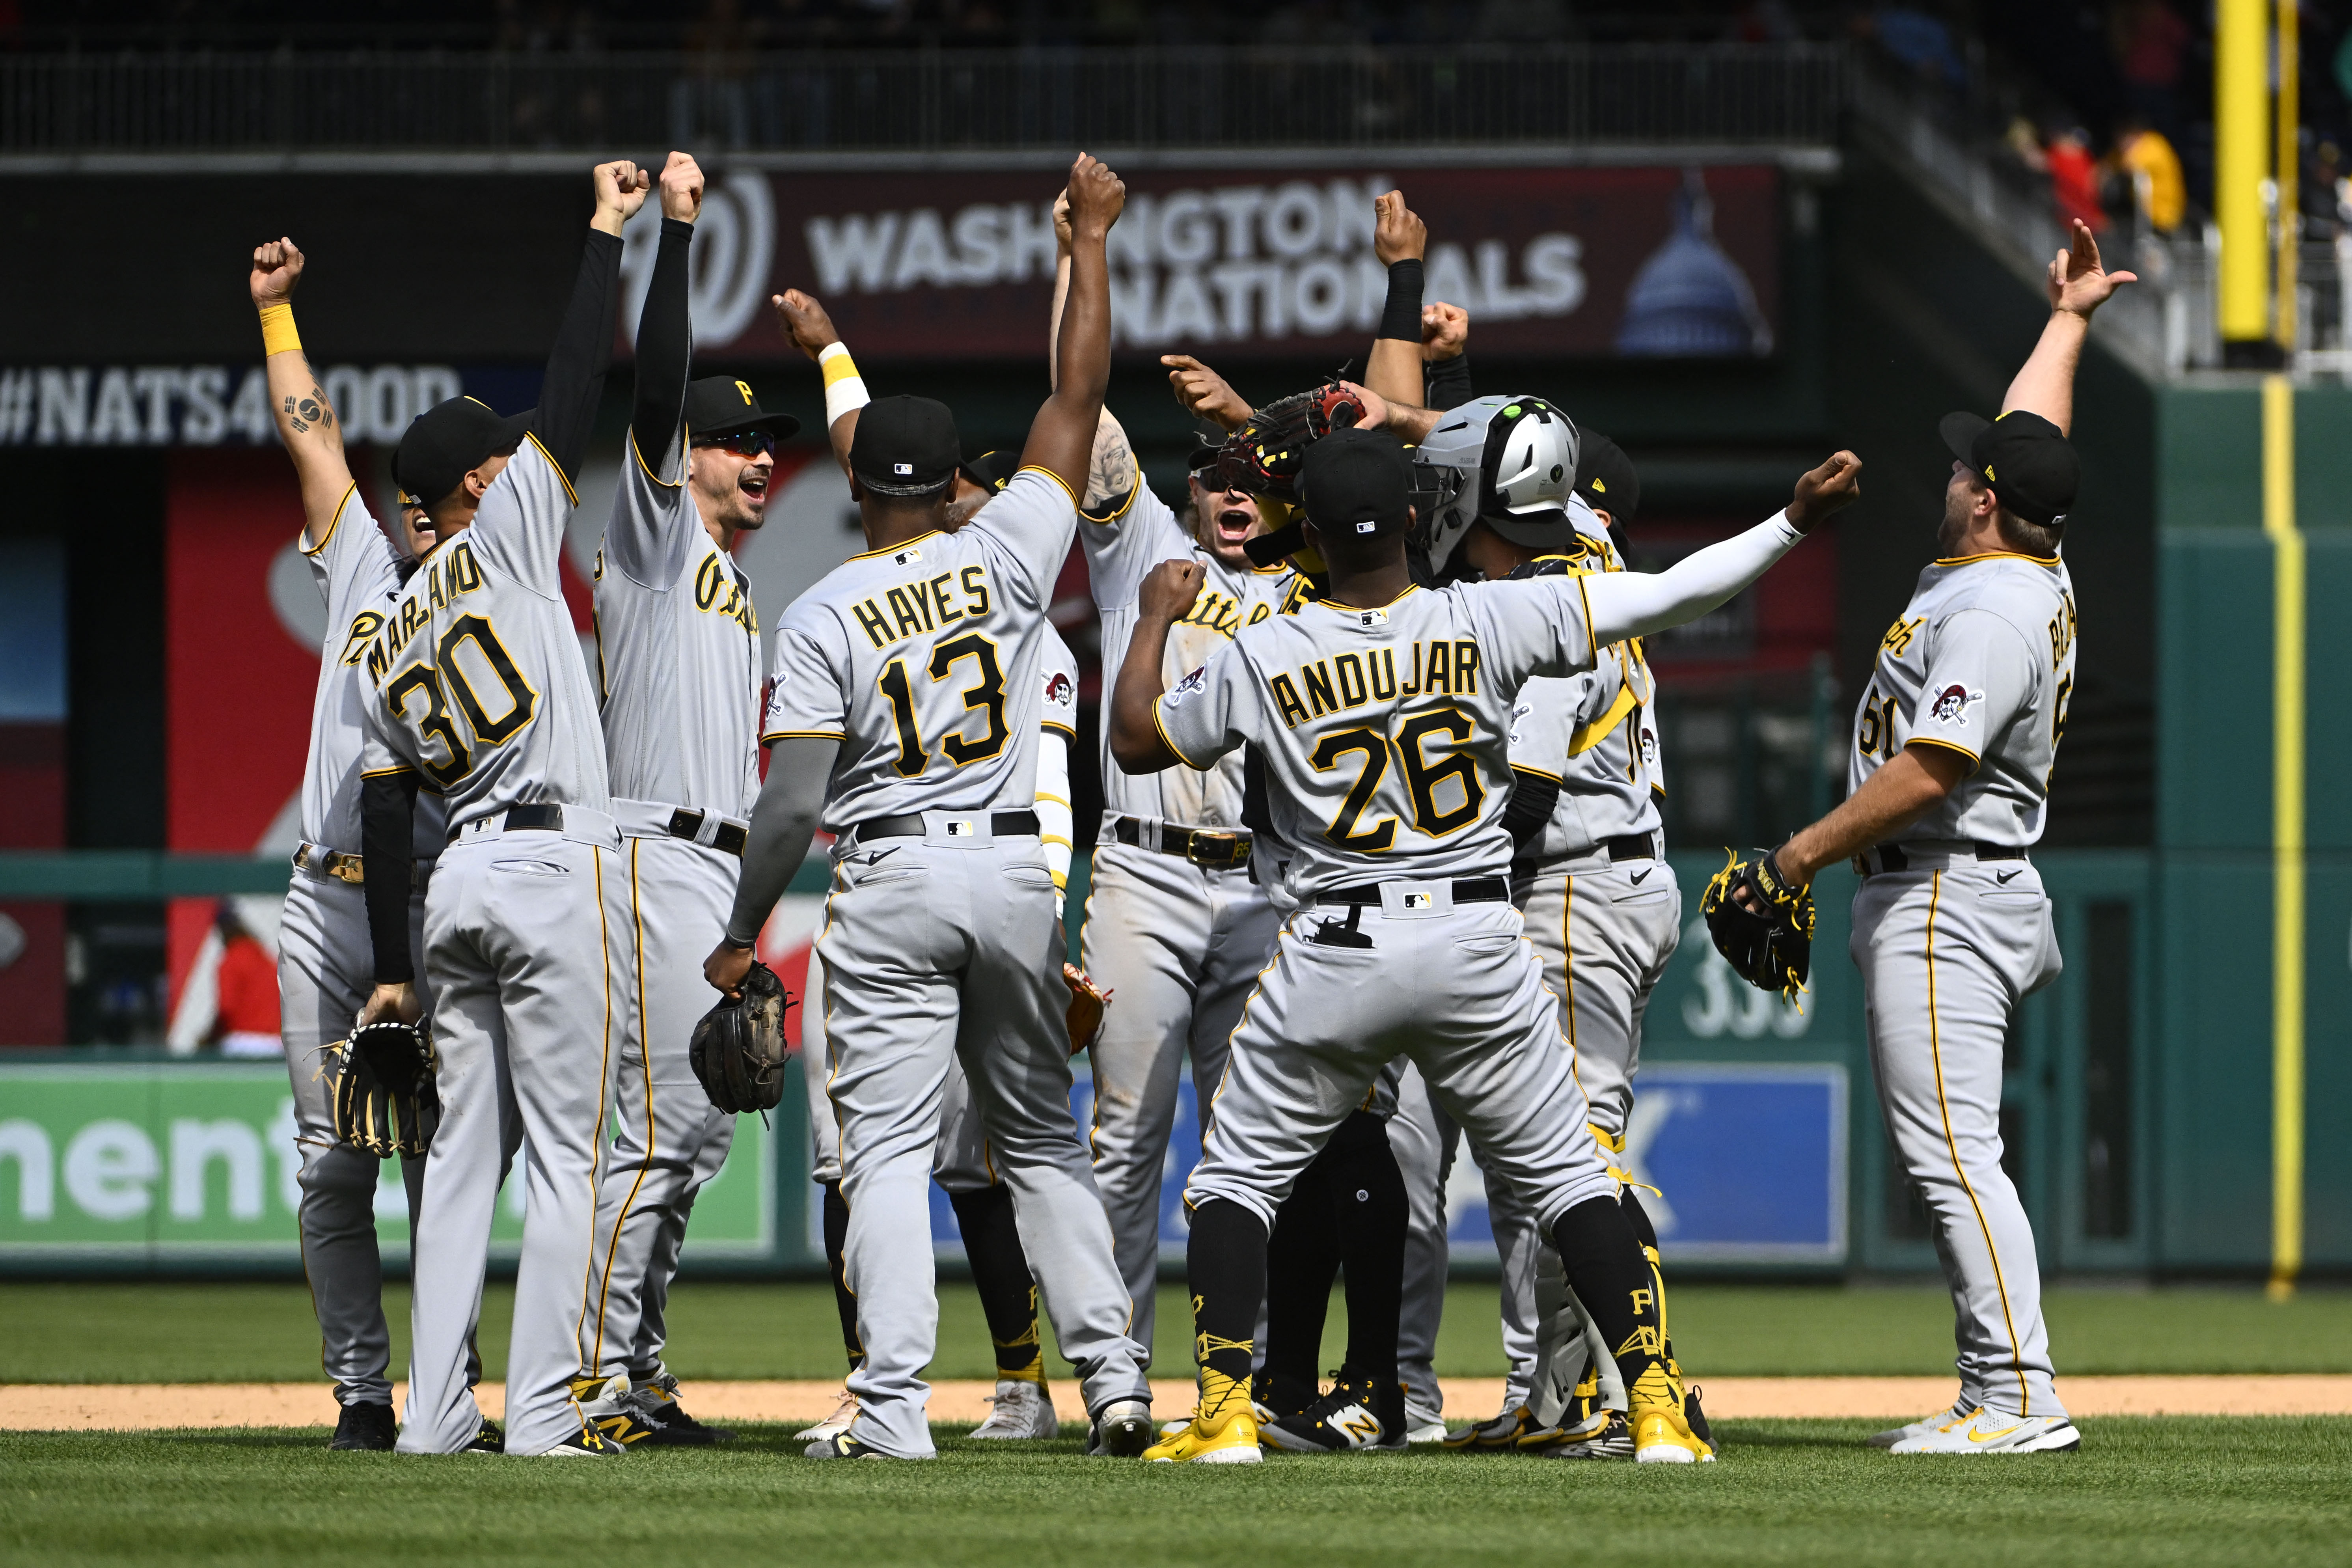 Ji Hwan Bae's walk-off homer lifts Pirates to improbable win over Astros -  The Athletic